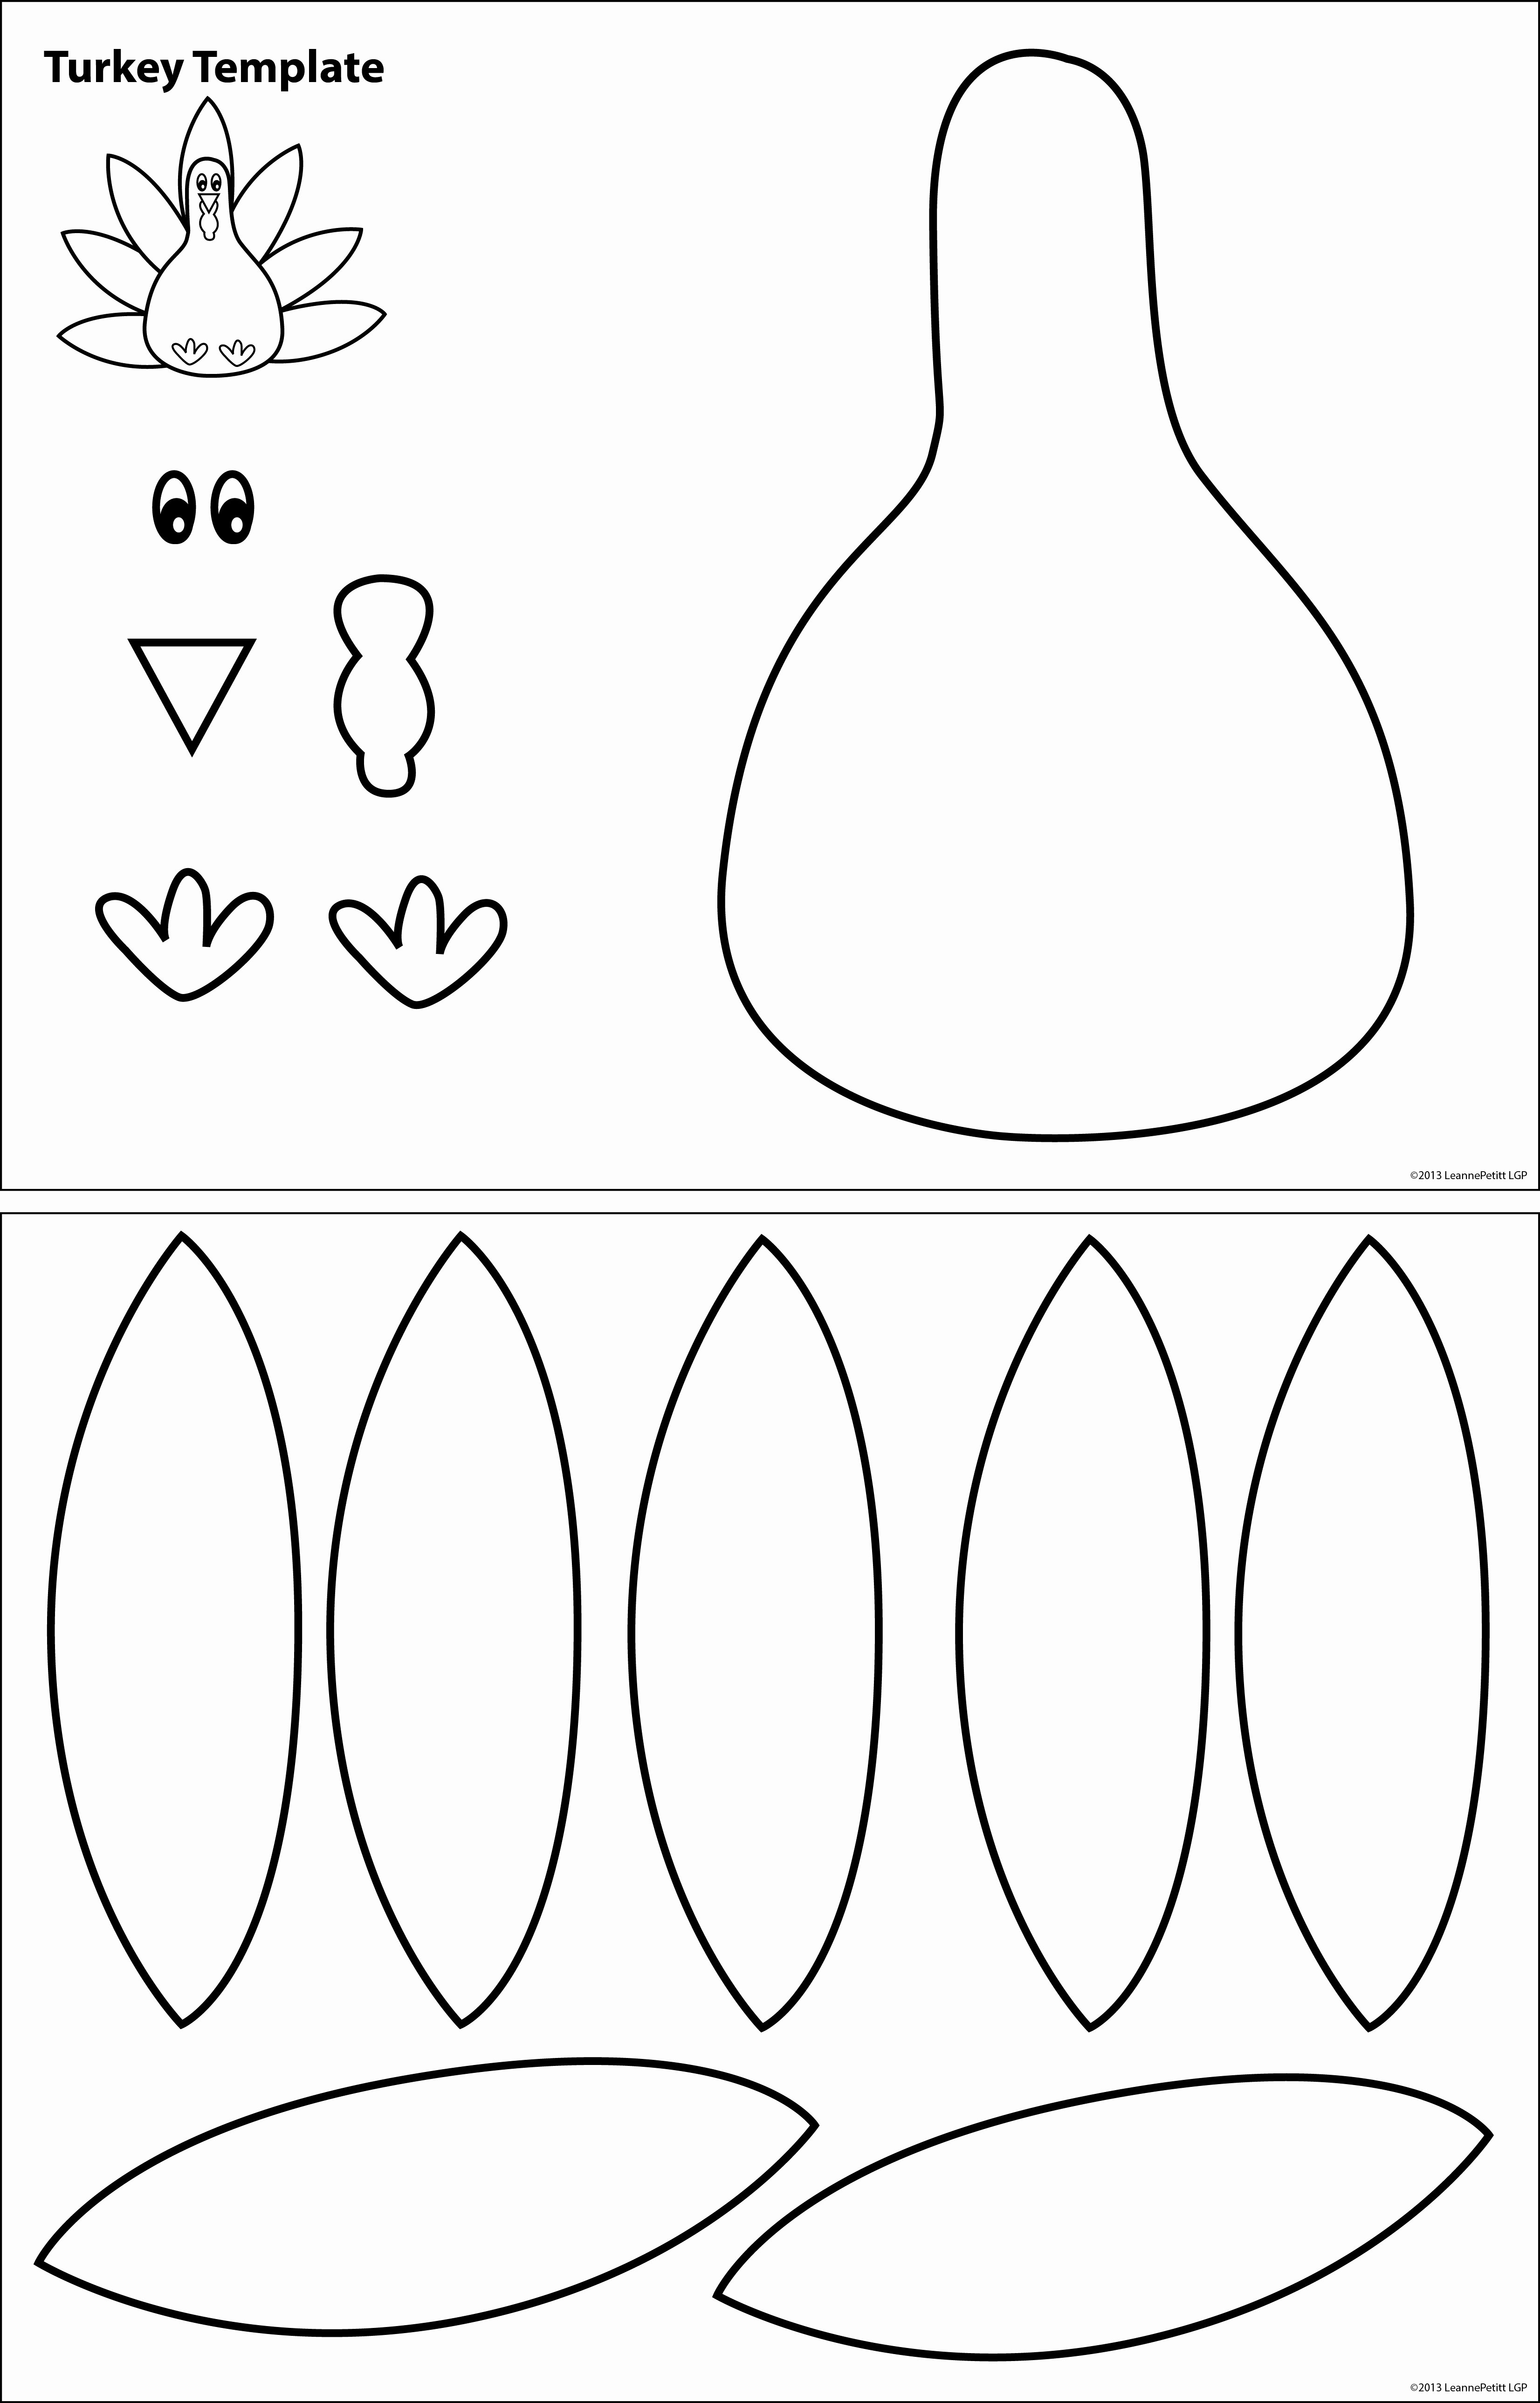 Simple White Paper Template Fresh Turkey Template – Wel E to Little Genius